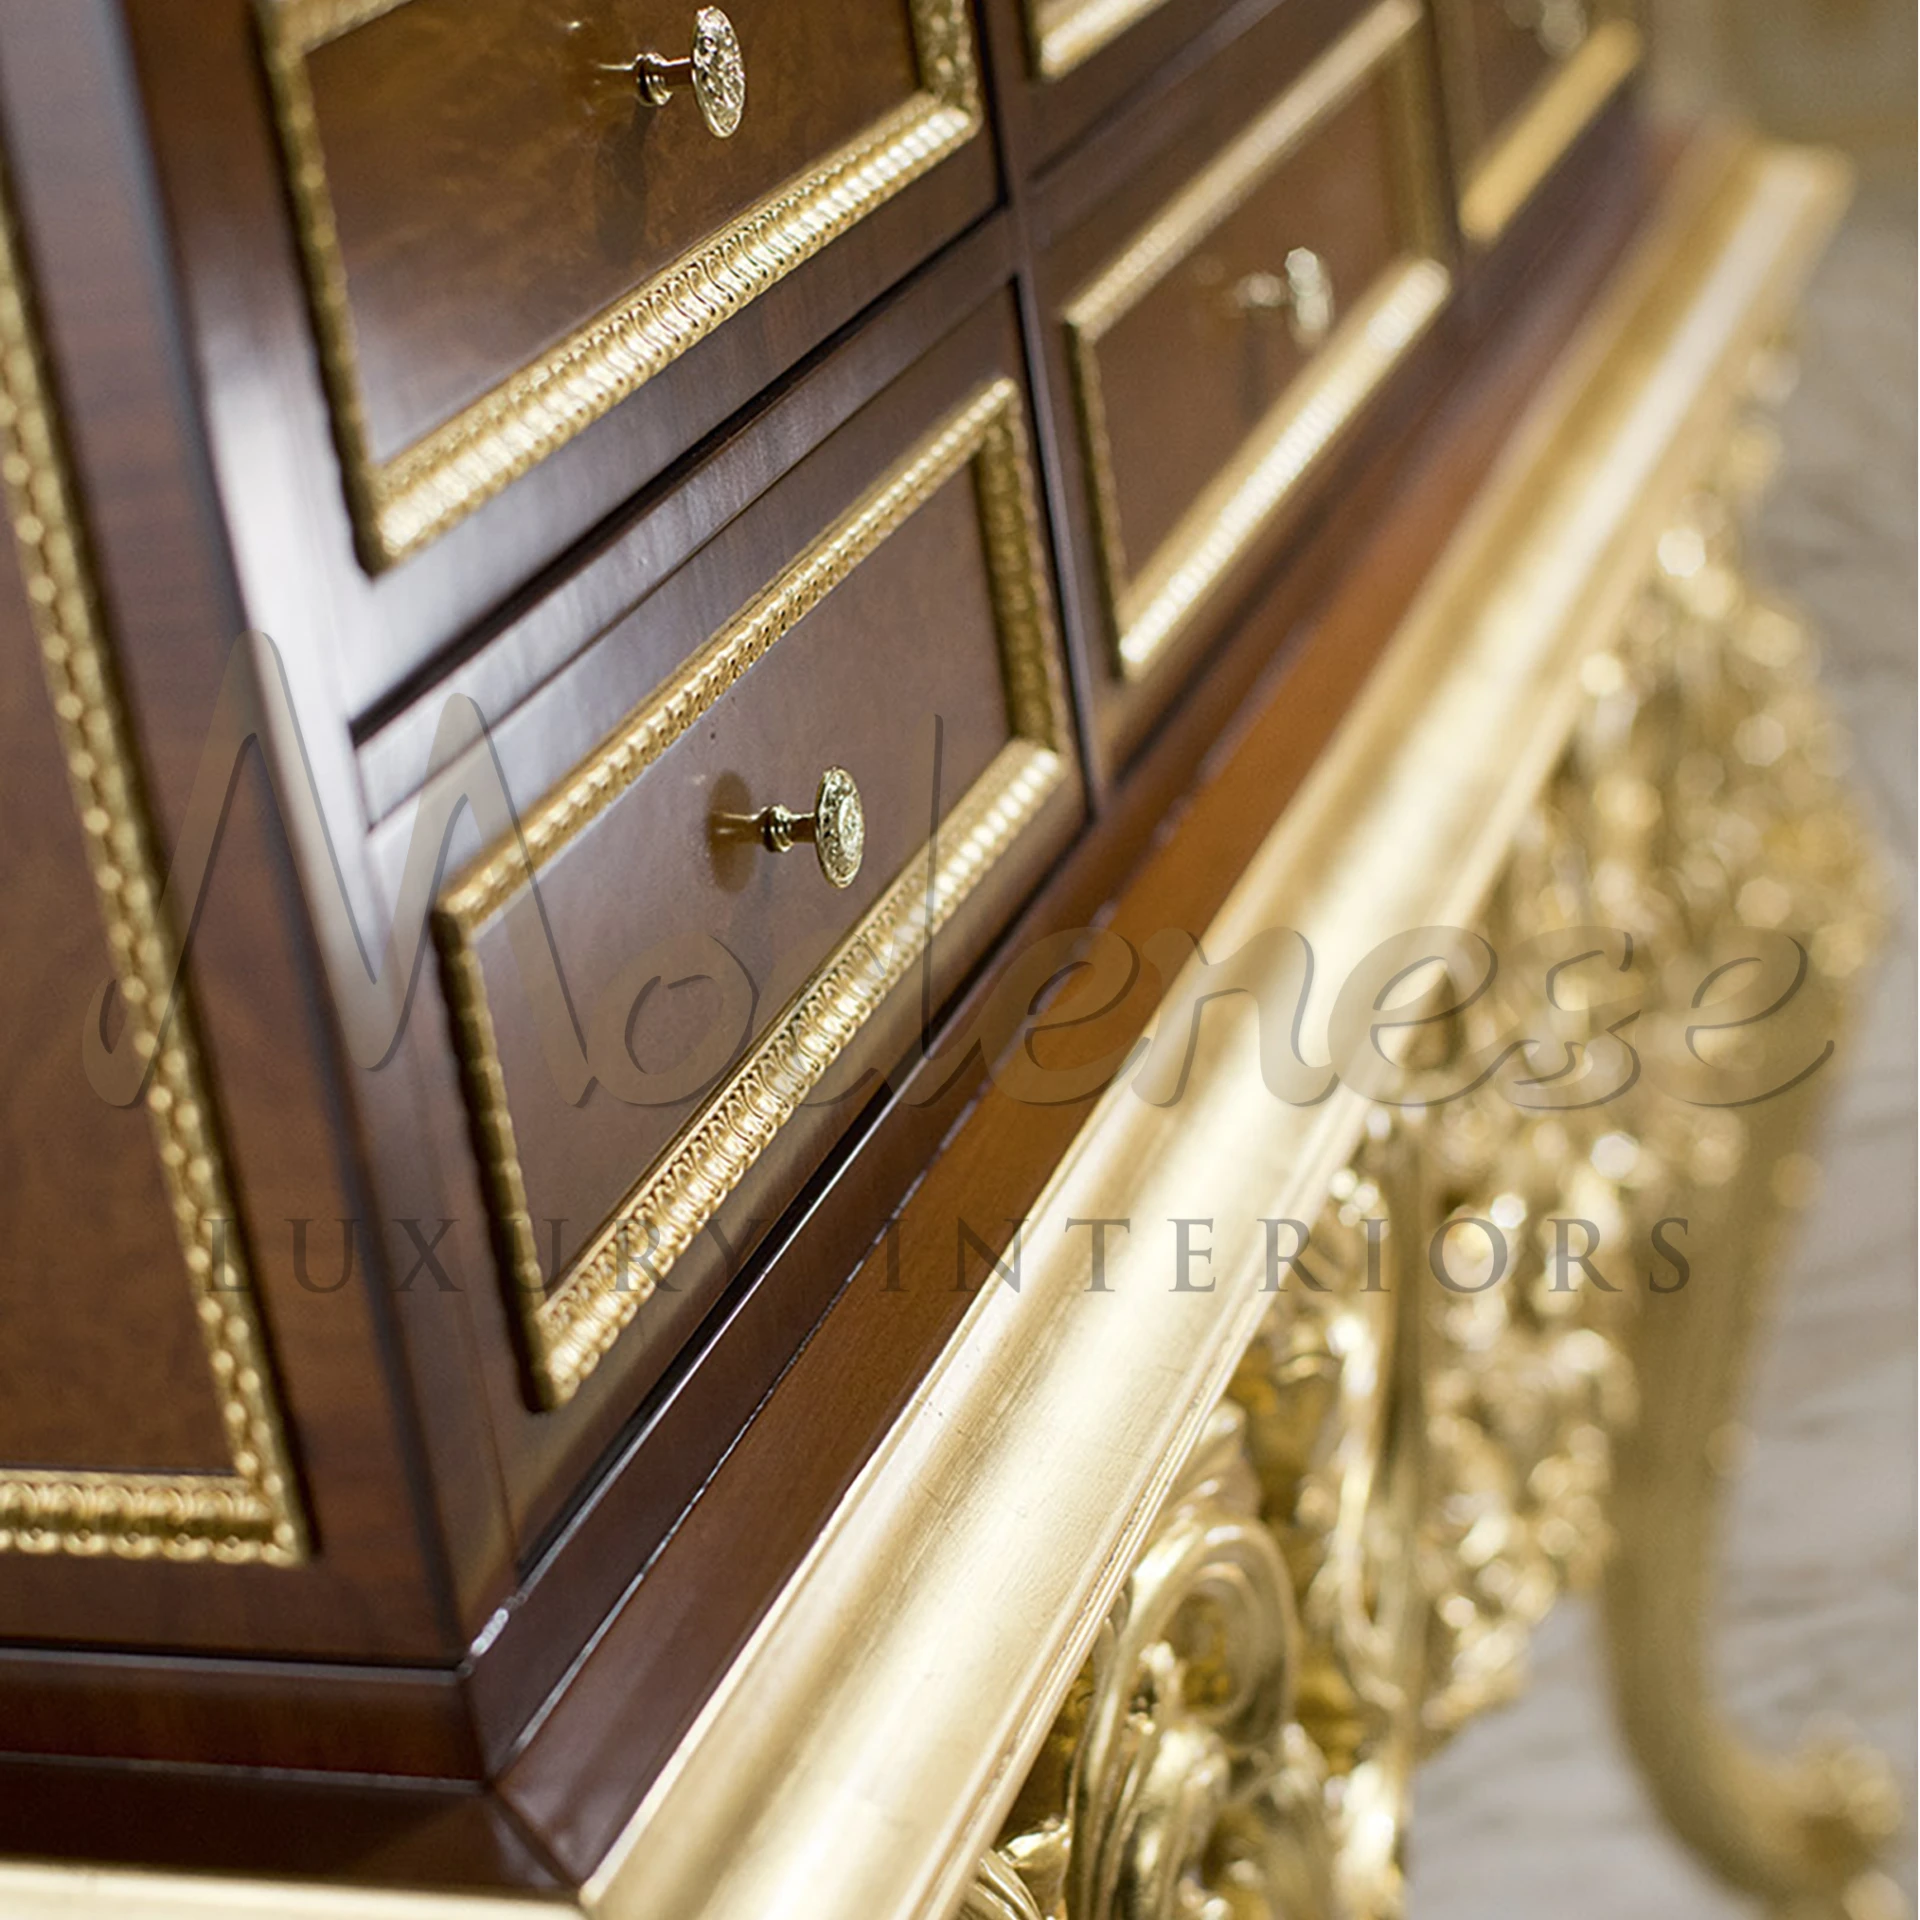 Modenese Furniture offers a masterpiece: a 13-drawer coin cabinet with breathtaking hand carvings, gold leaf applications, and a sophisticated walnut finish for the discerning collector.